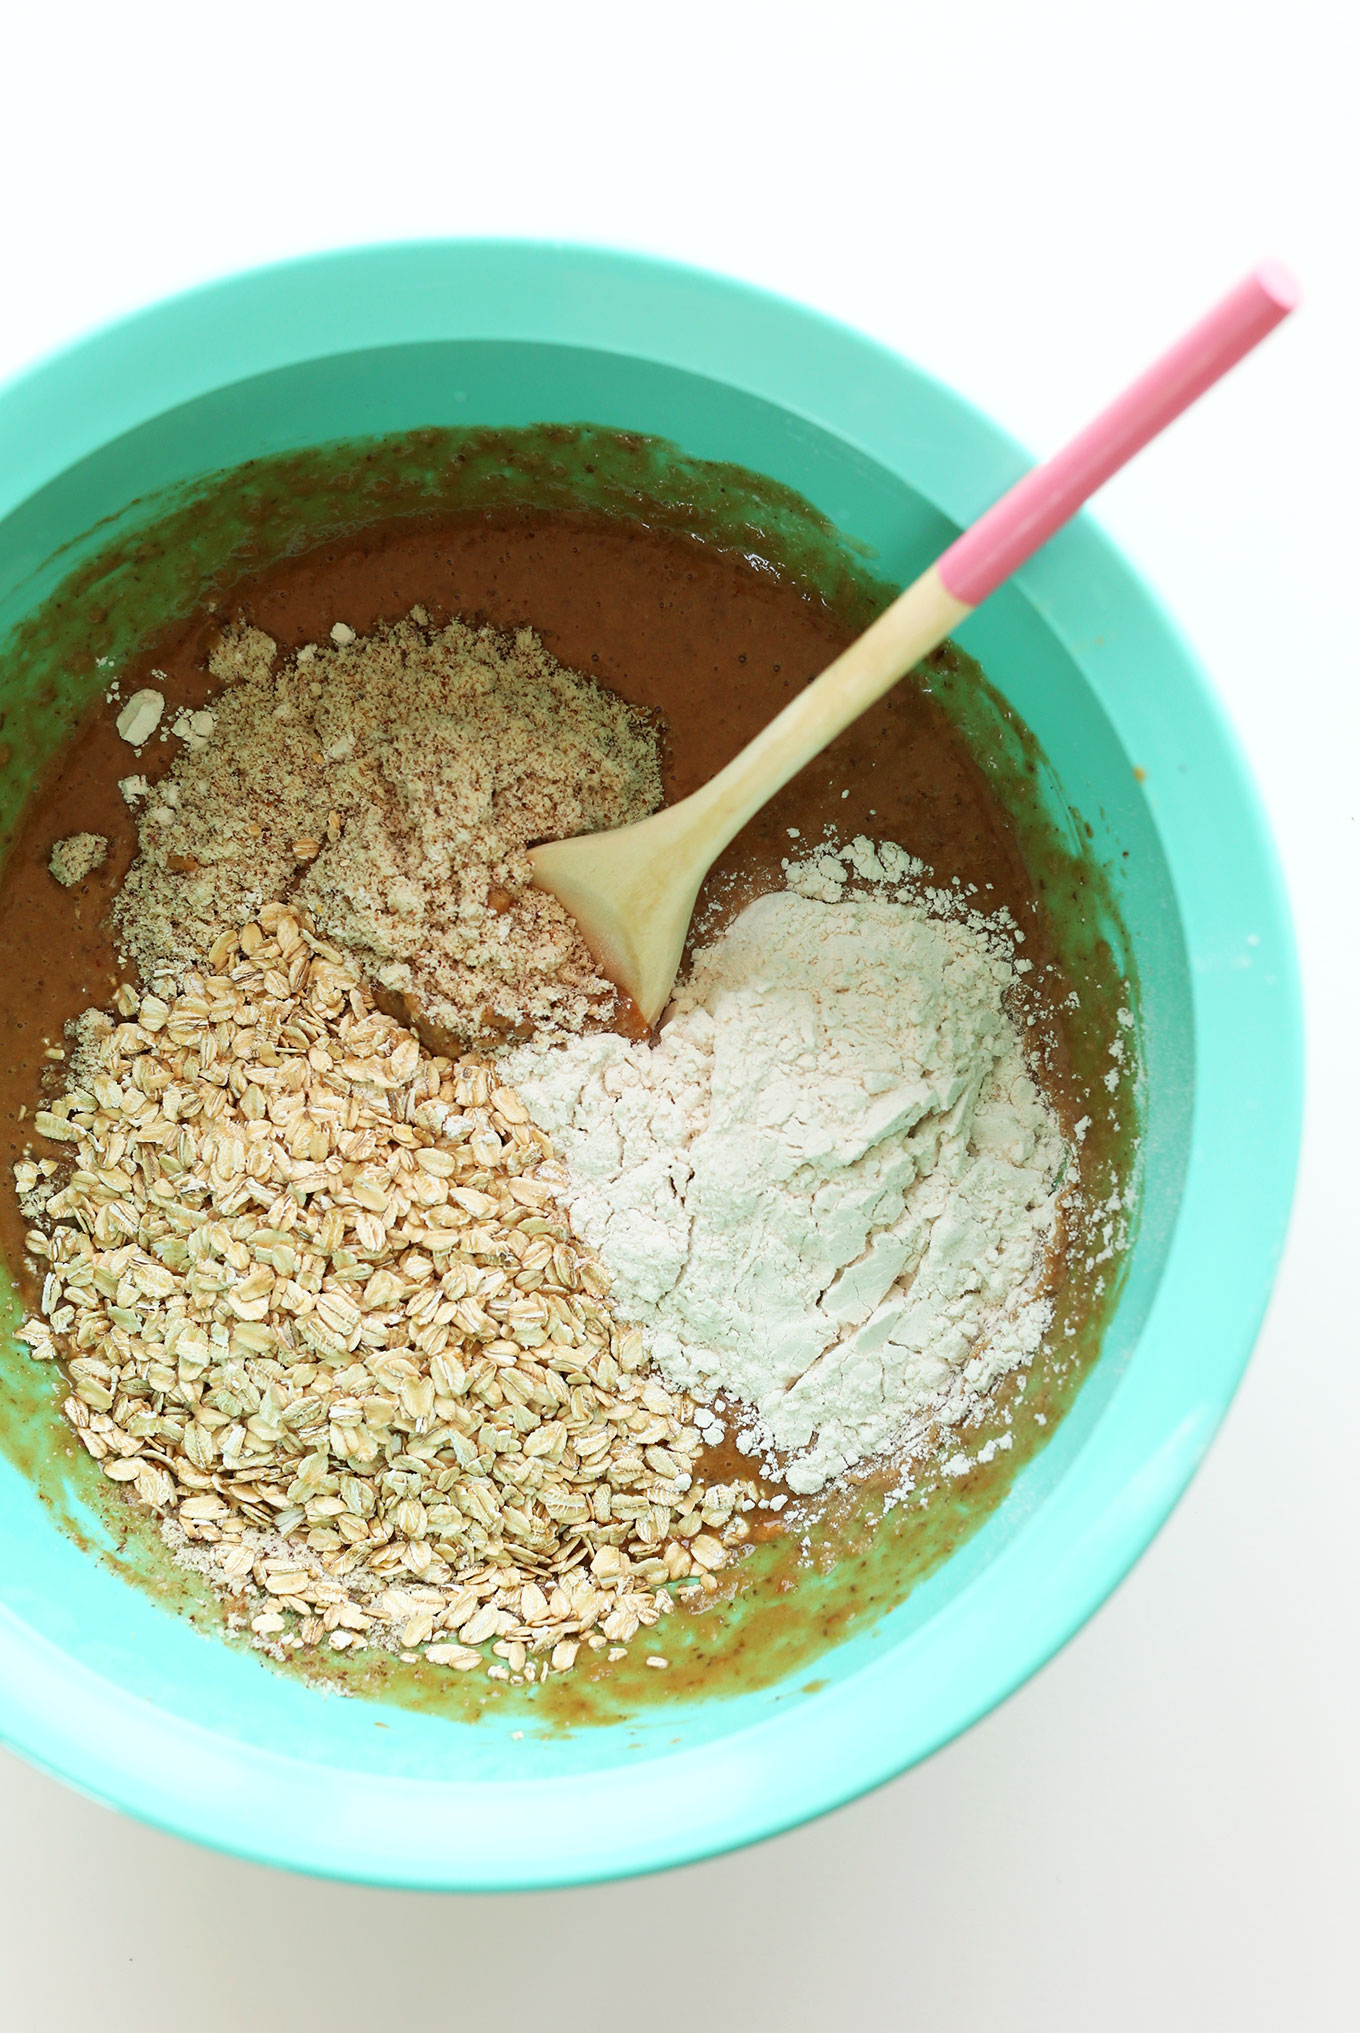 Stirring wet and dry ingredients together for our delicious gluten-free vegan PB&J Muffins